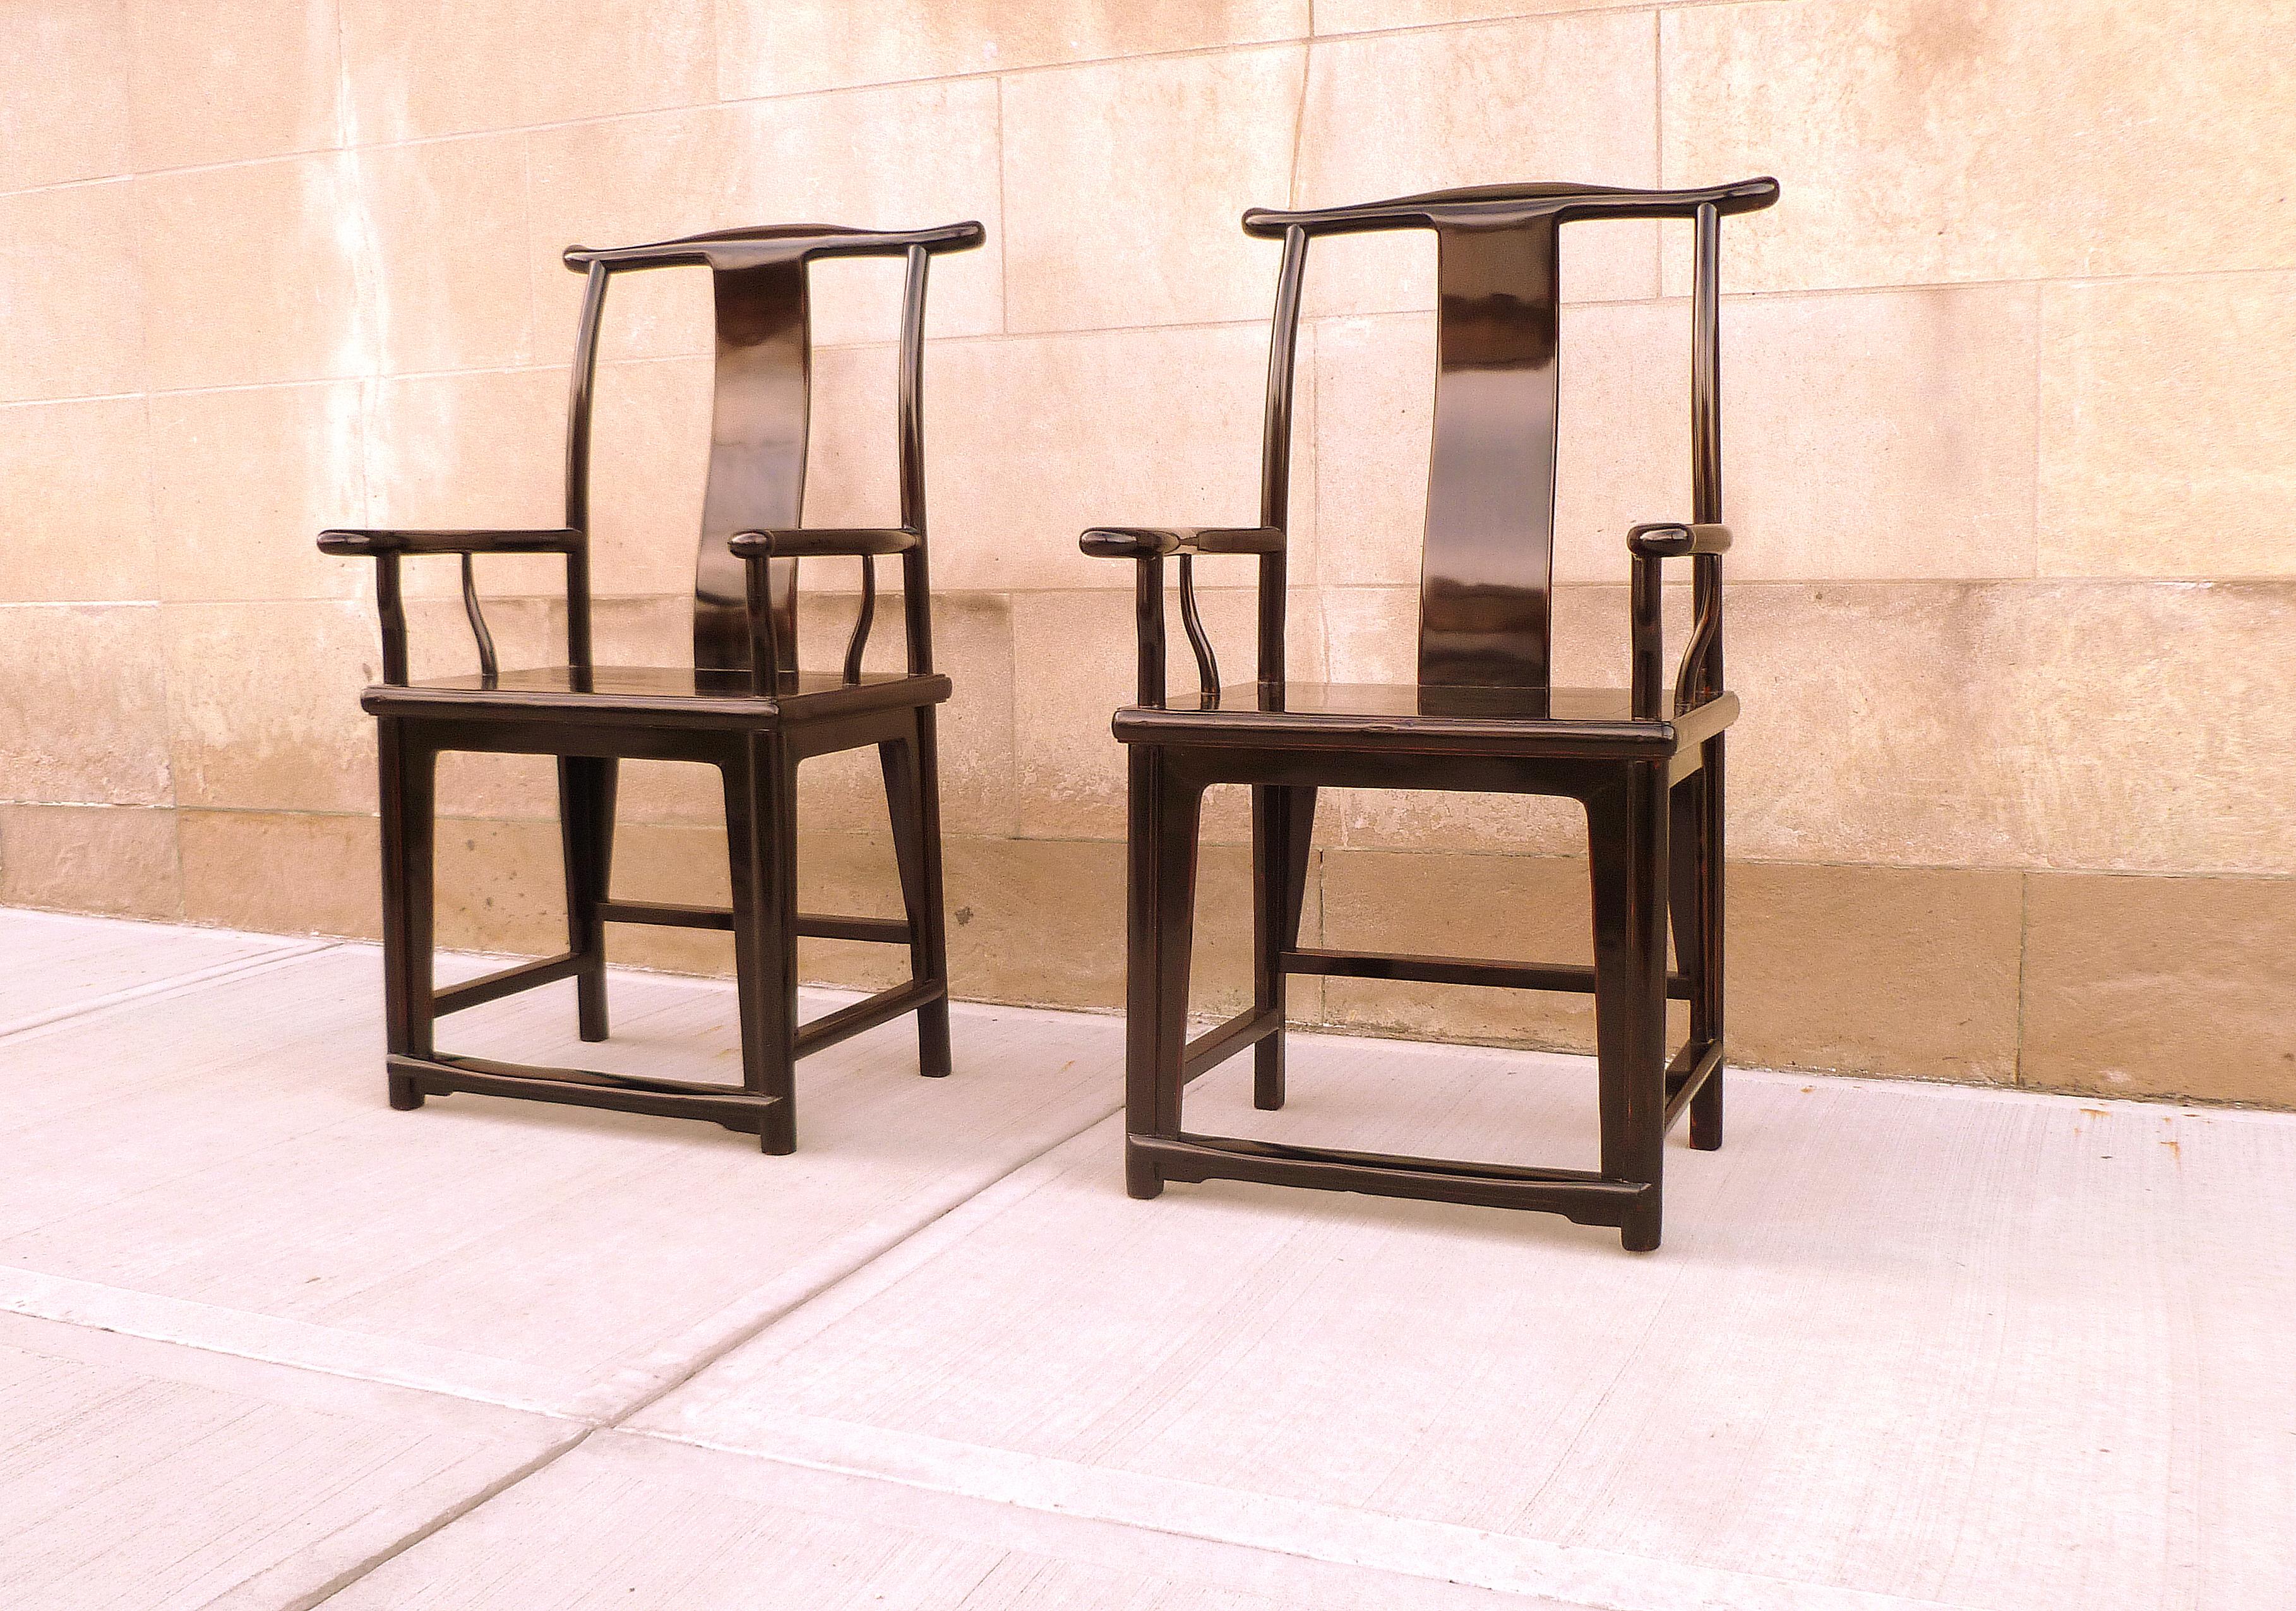 Polished Pair of Refine Black Lacquer Armchairs